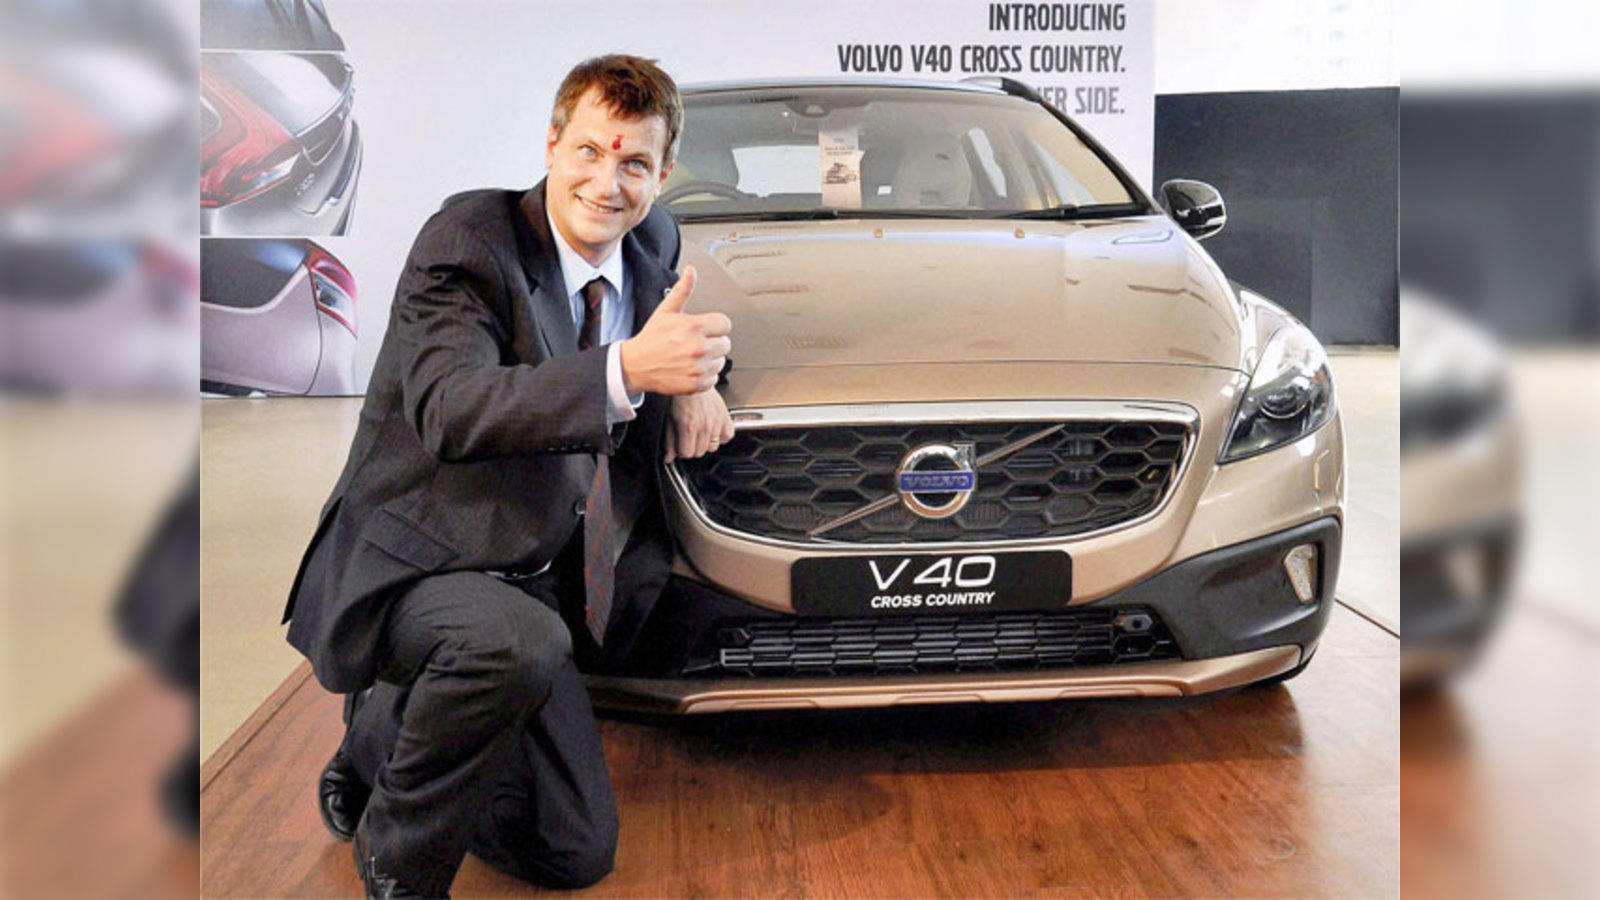 Volvo launches V40 Cross Country luxury hatchback at Rs 28.5 lakh - The  Economic Times